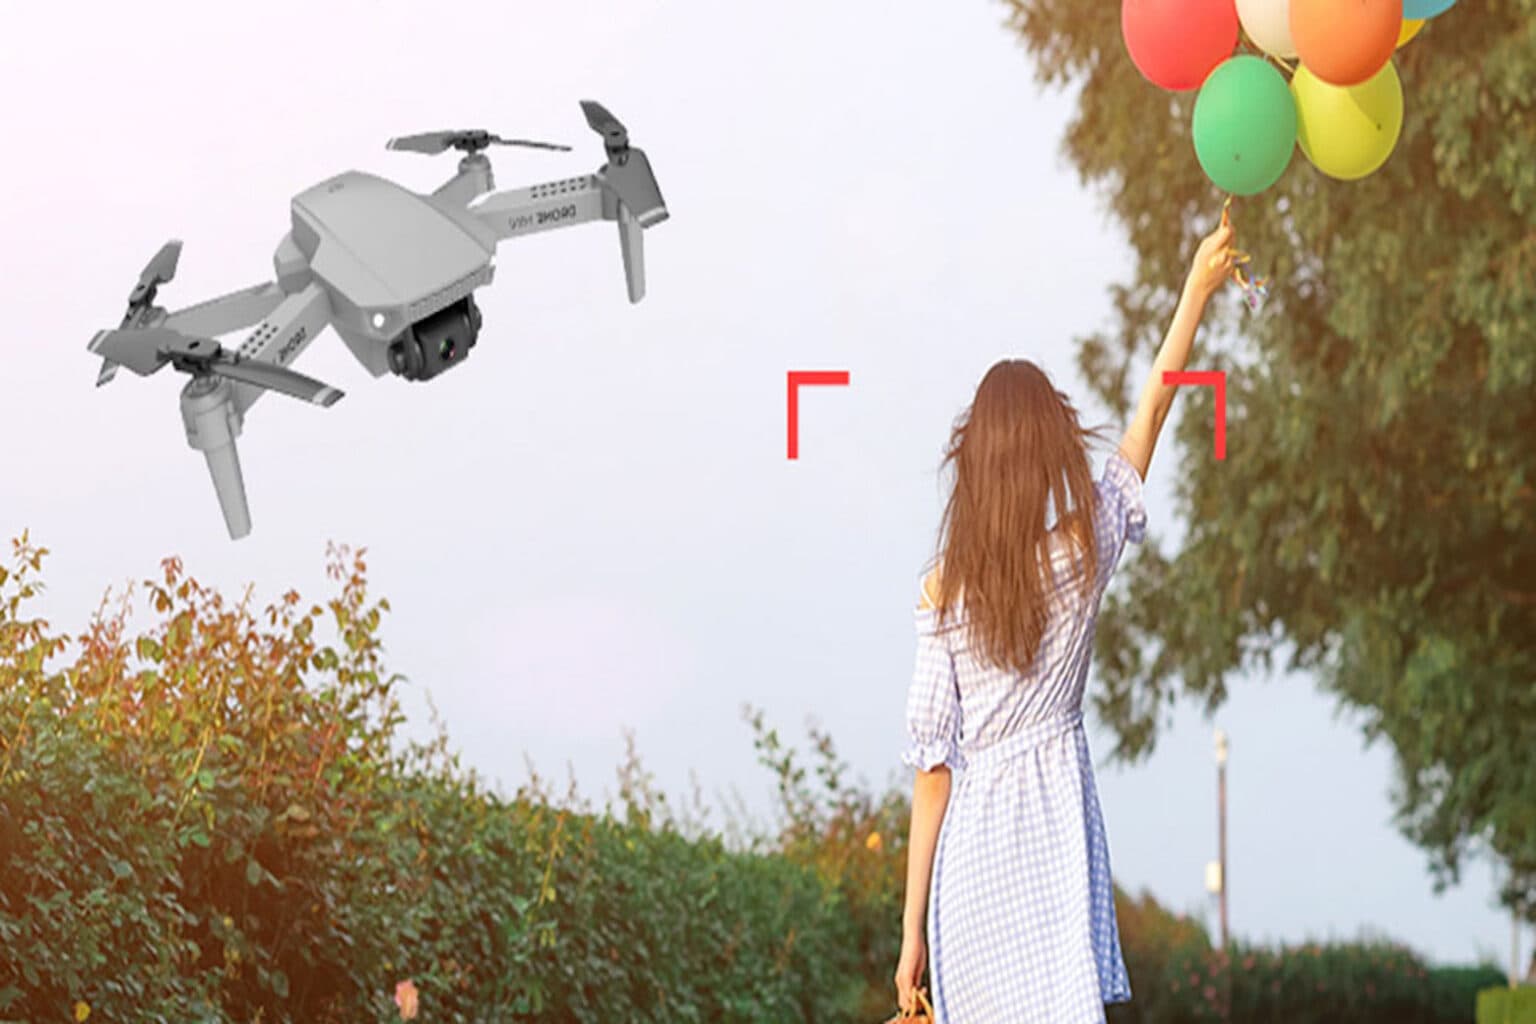 Capture incredible videos with these high-quality drones